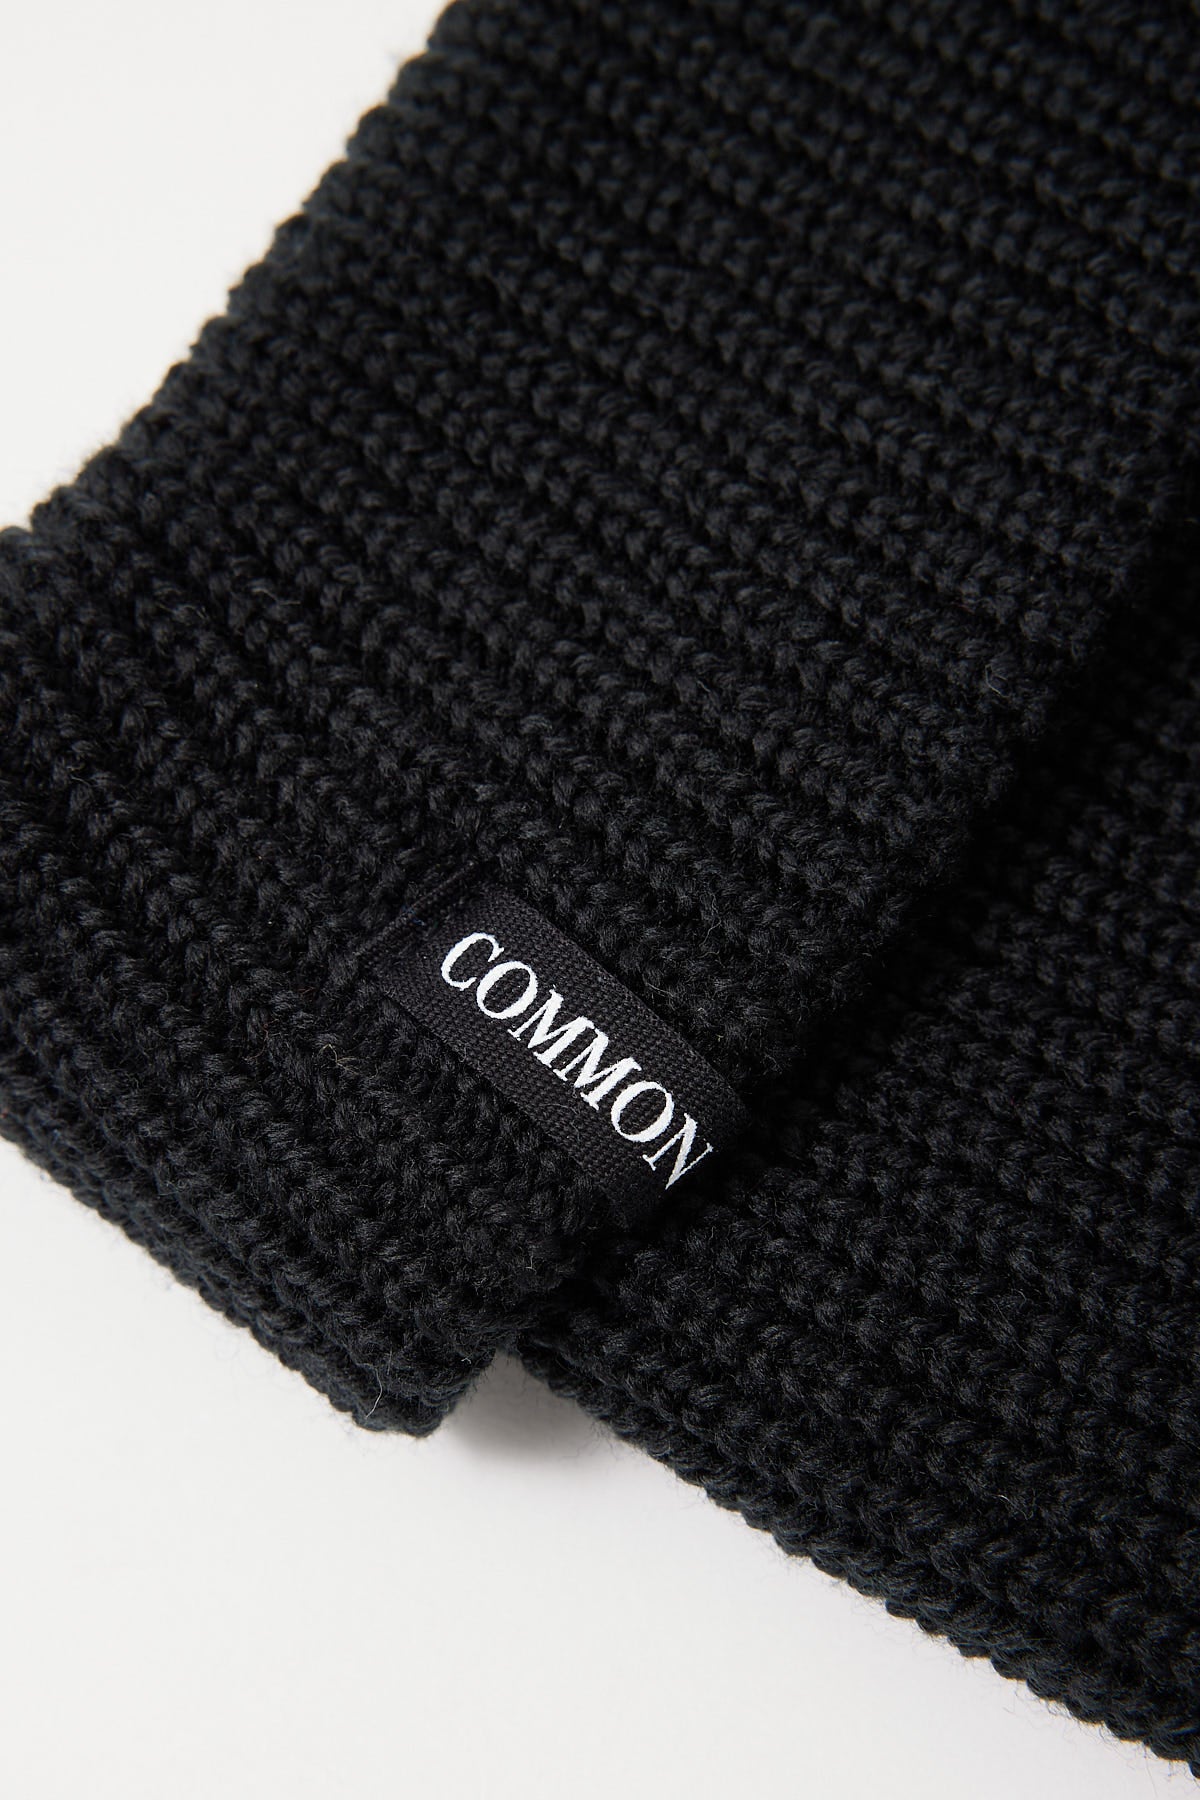 Common Need Better Low Profile Beanie Black